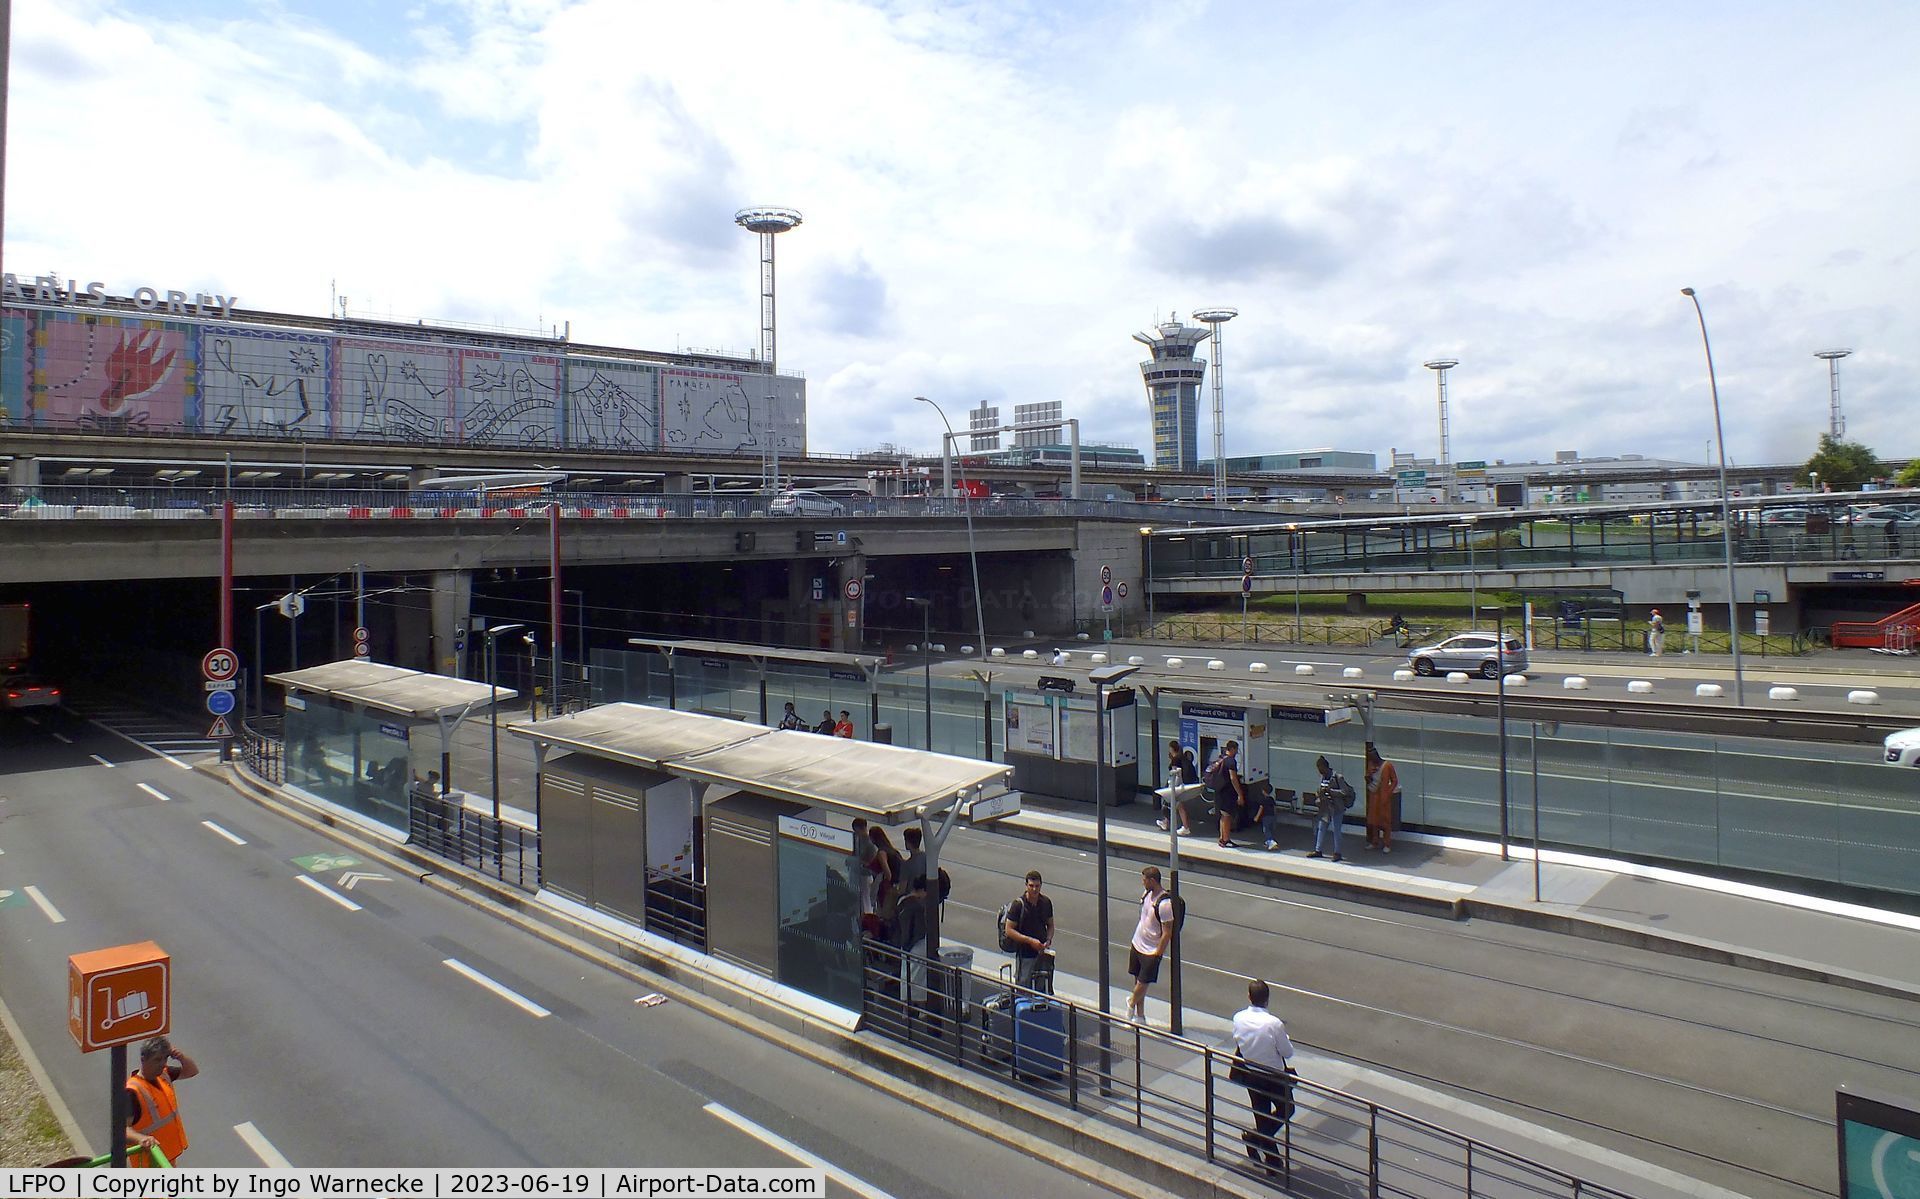 Paris Orly Airport, Orly (near Paris) France (LFPO) - landside view of the terminal, tower and airport tram station at Paris/Orly airport